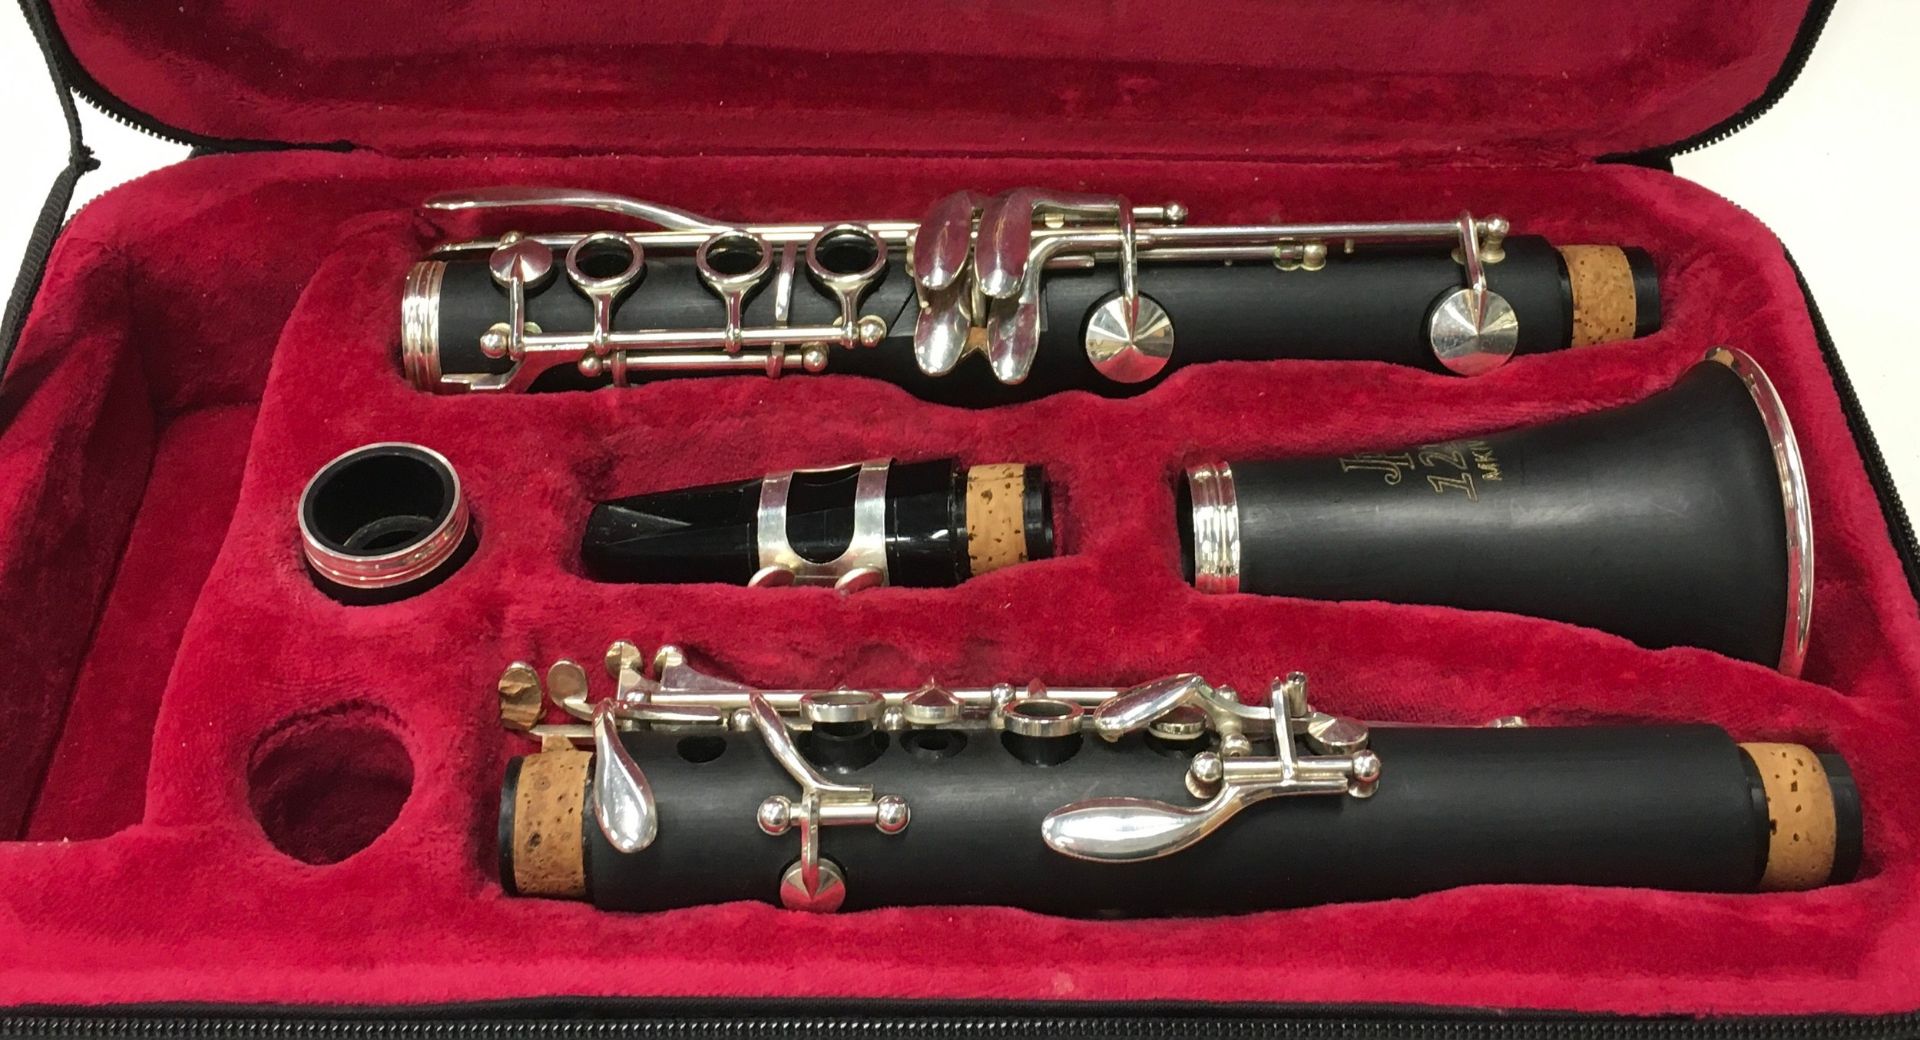 John Packer JP 121 mkIV clarinet in carry case. Very good cosmetic condition.